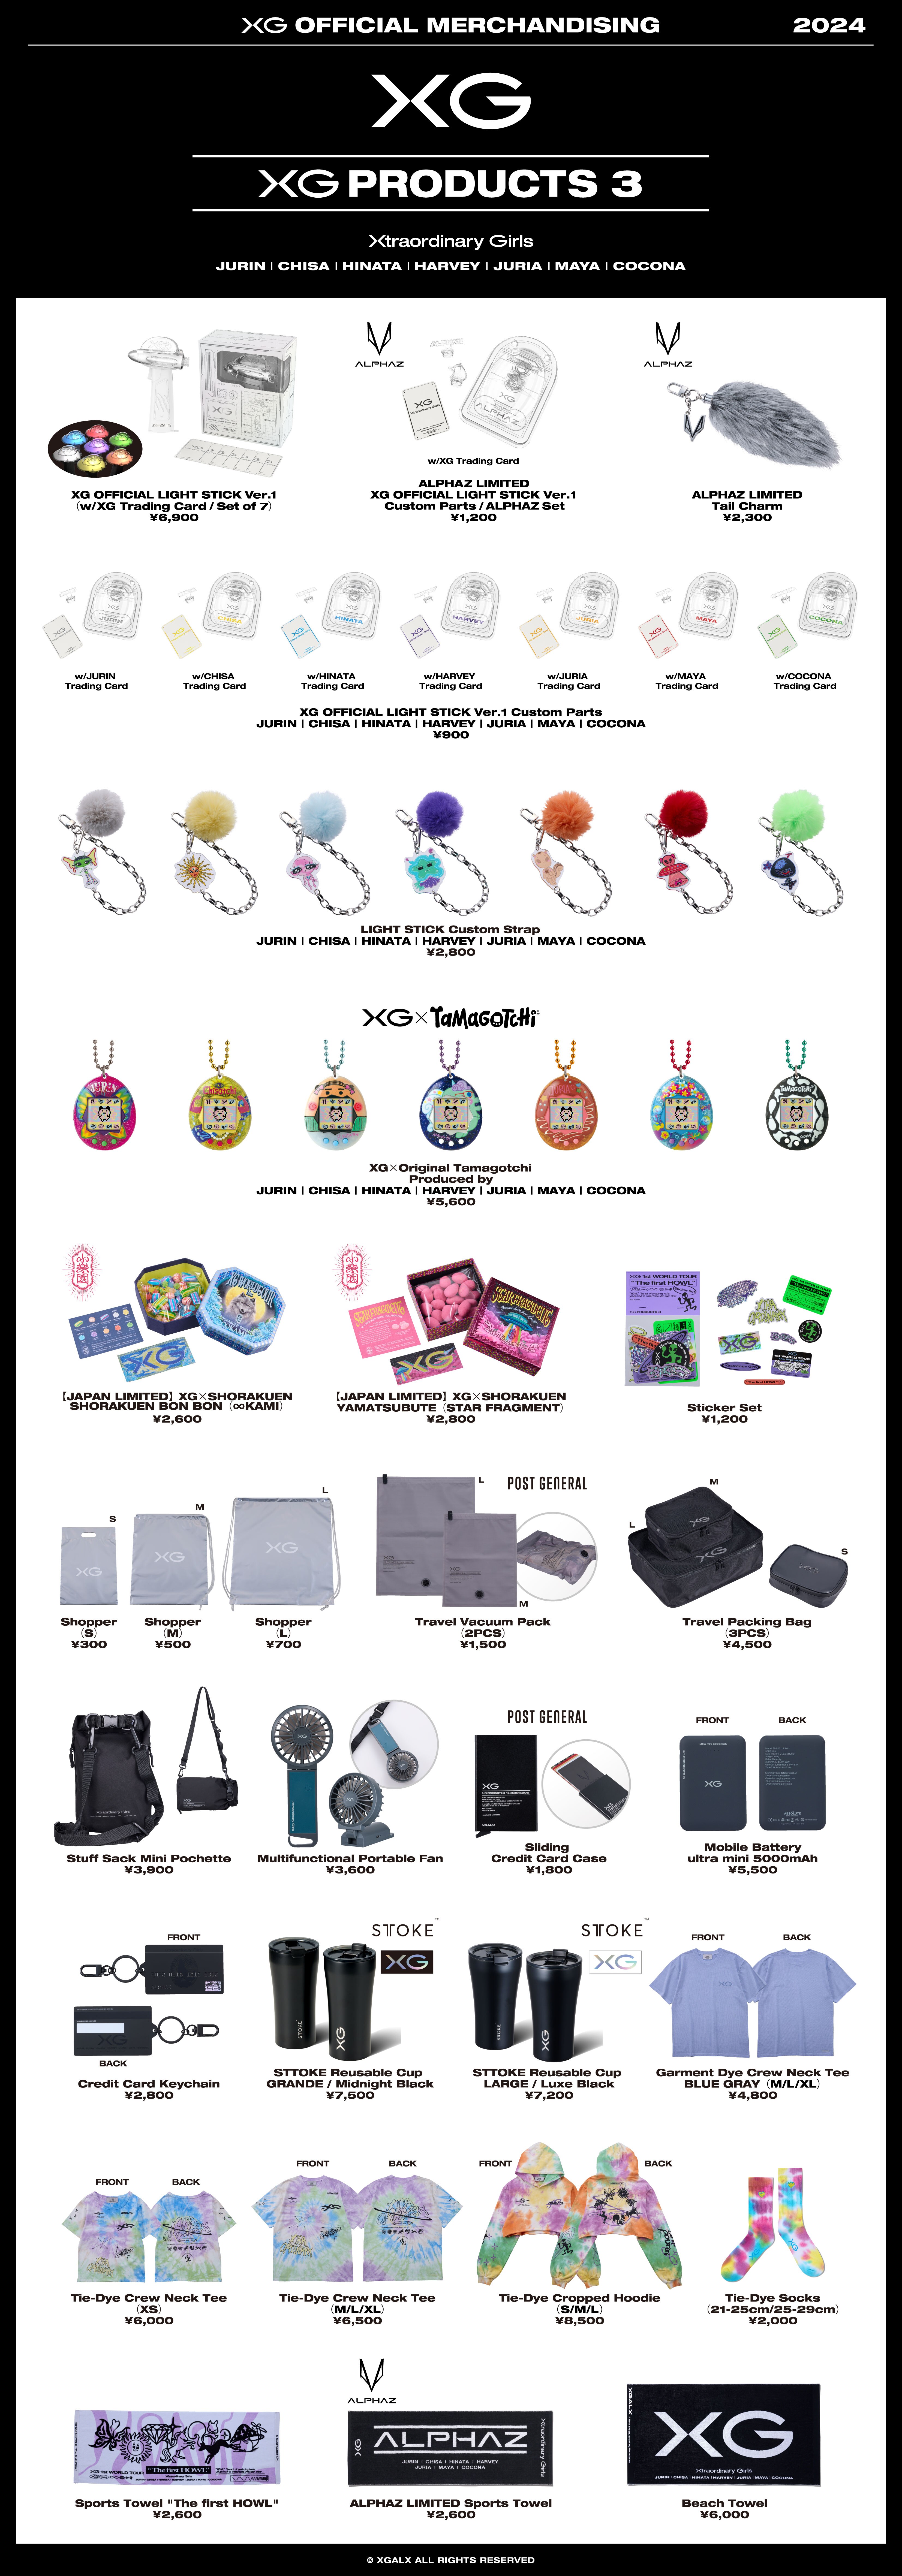 XG OFFICIAL MERCHANDISE “XG PRODUCTS 3” Launch Details! - NEWS 